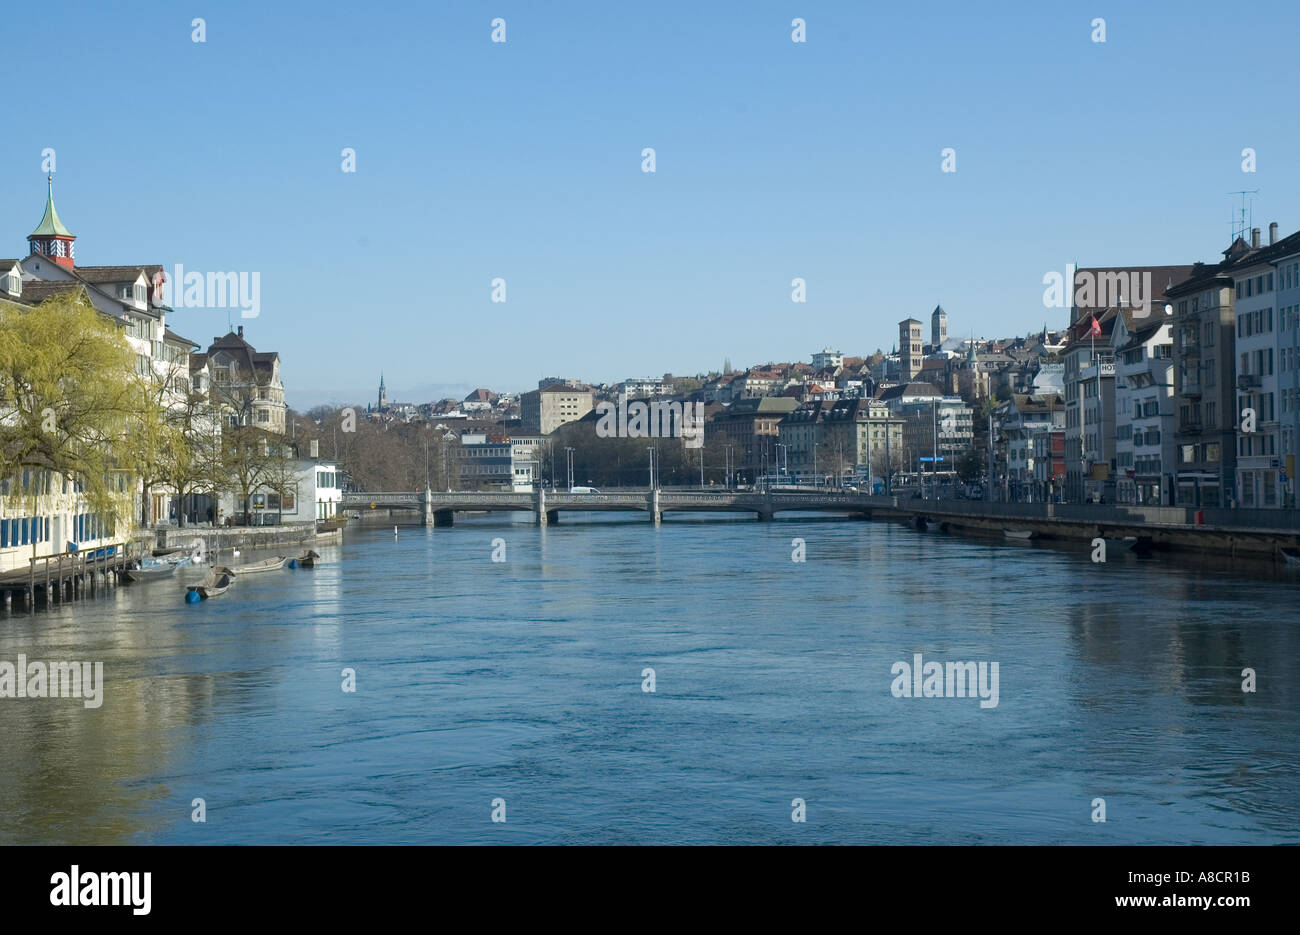 A scene from Limmat River in the beautiful city of Zurich in Switzerland Stock Photo